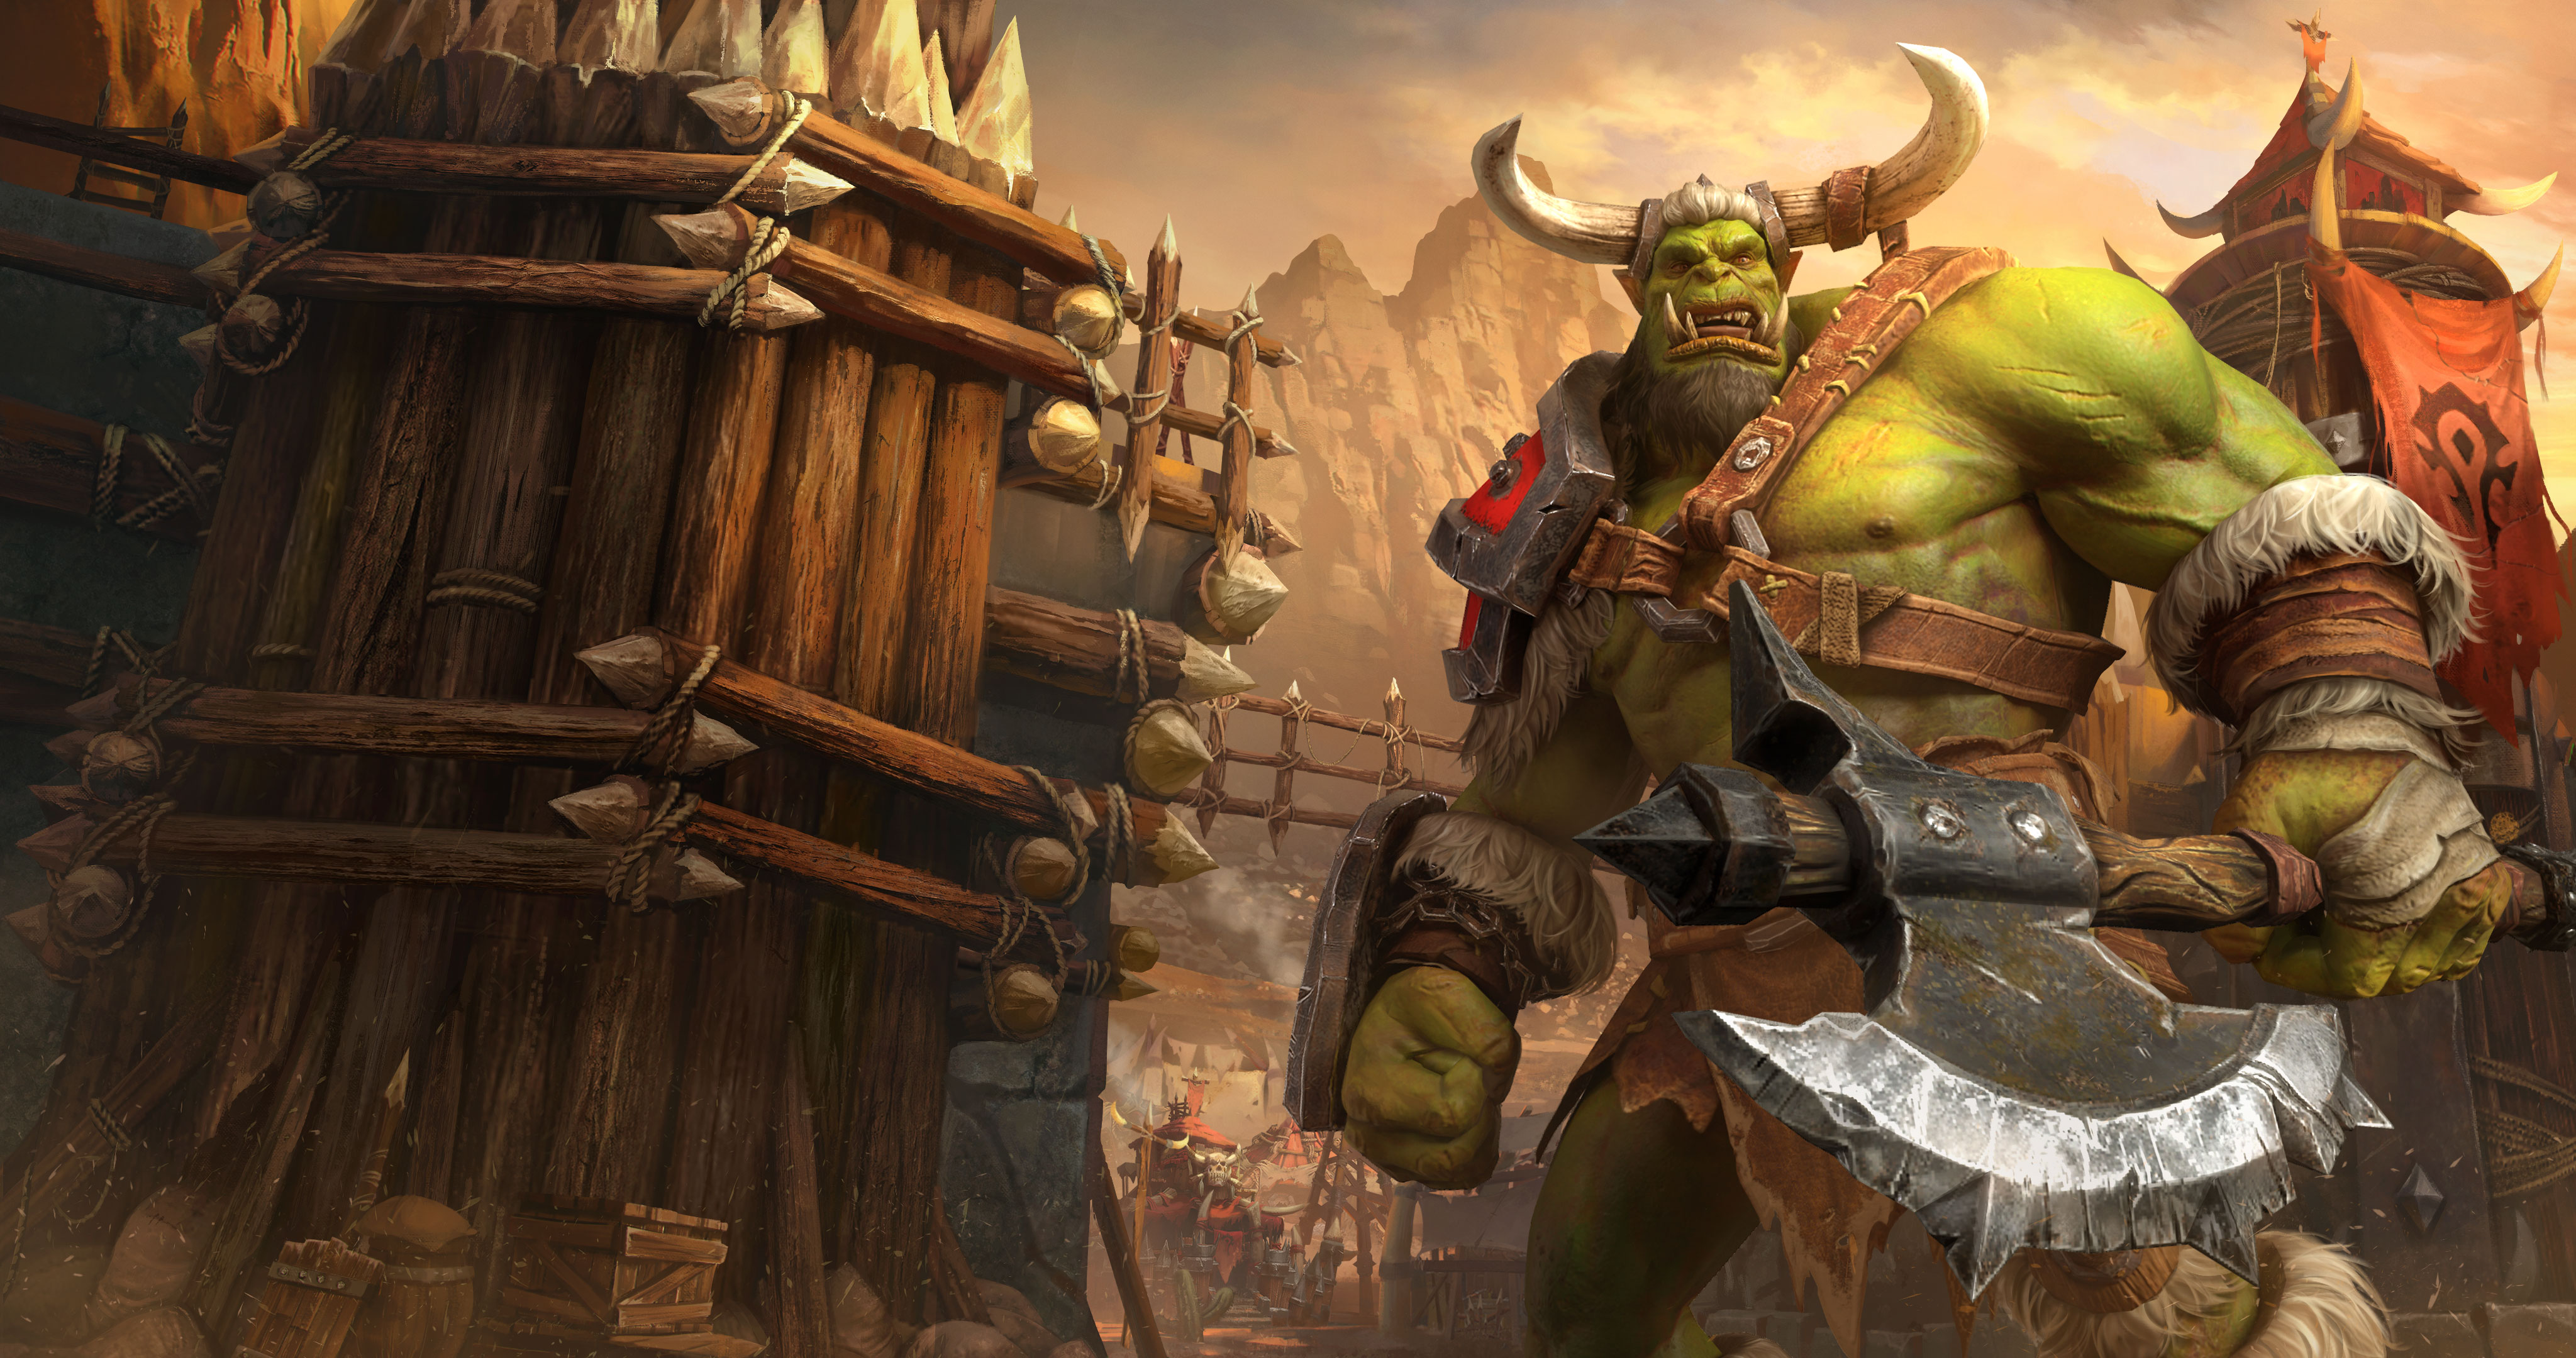 Warcraft Iii Reforged Blizzard Entertainment Warcraft Orcs Video Games Axes Video Game Art Video Gam 4096x2160